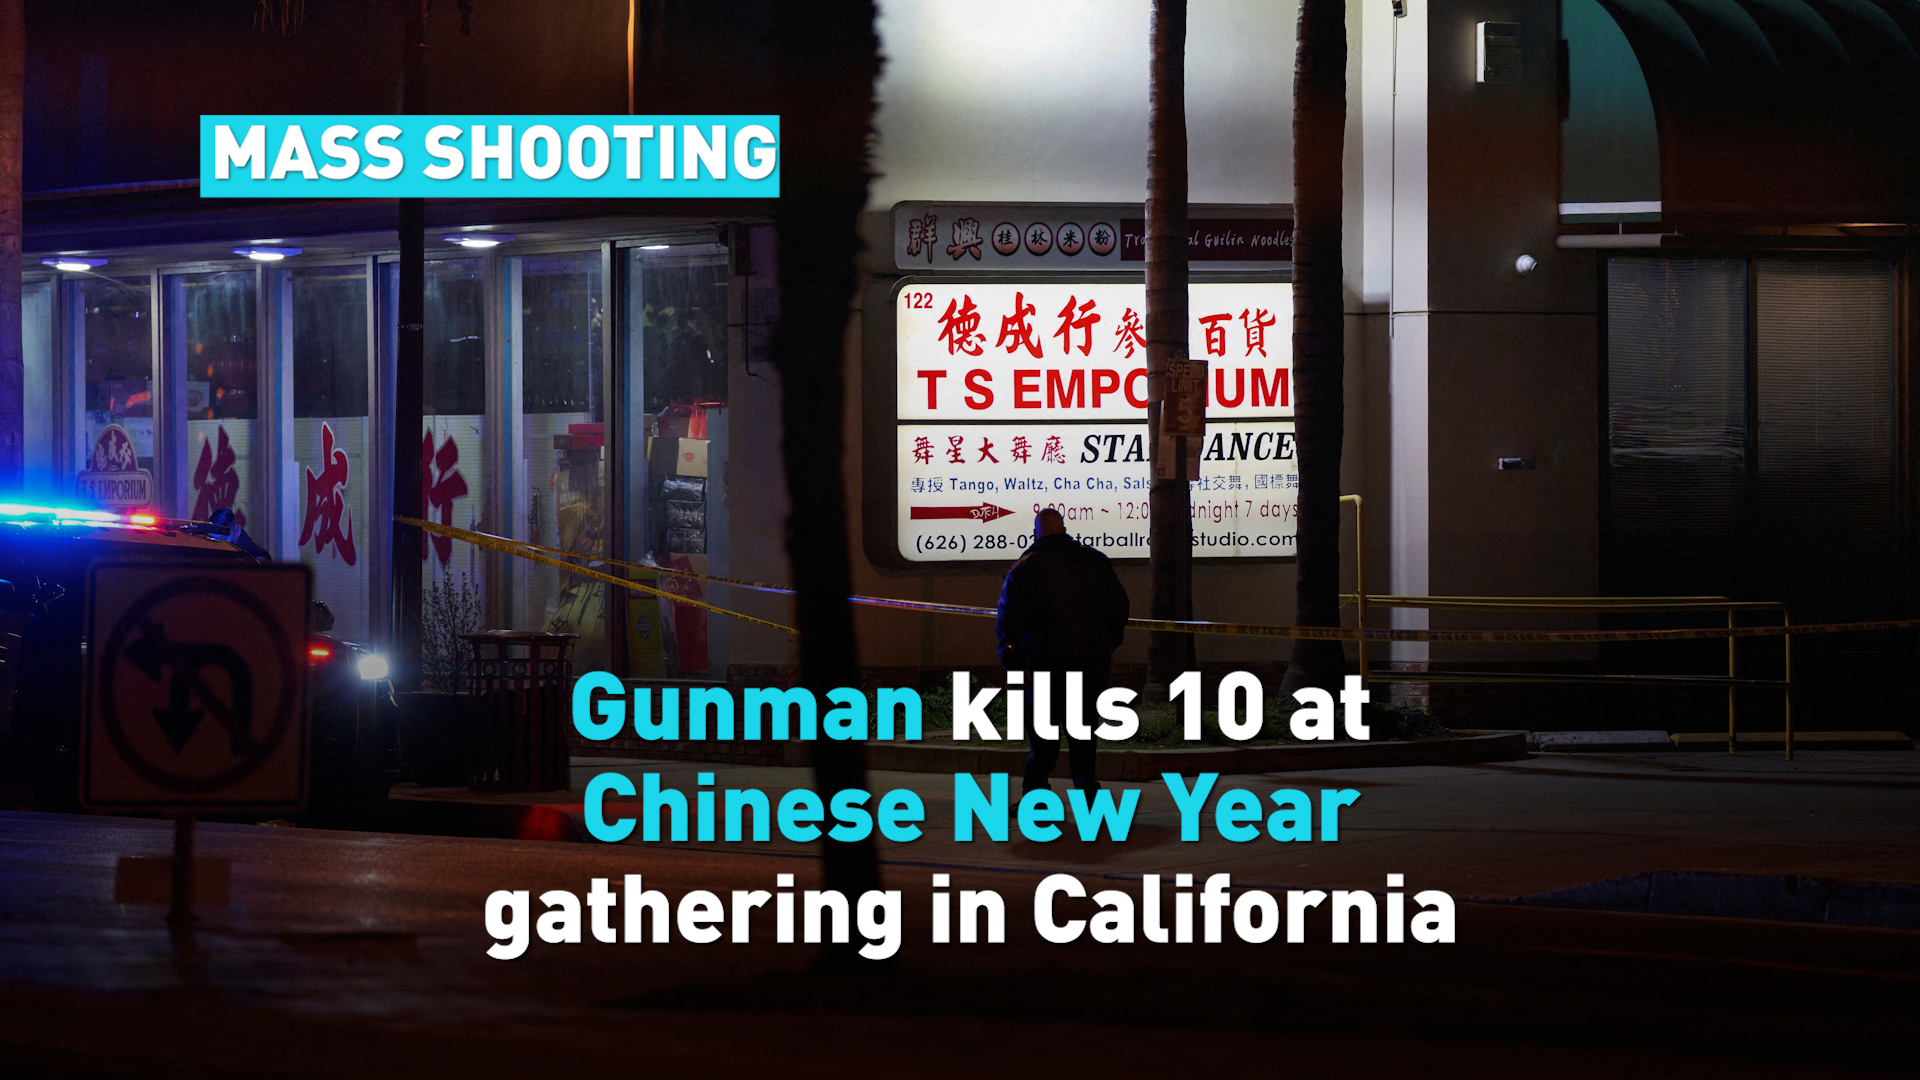 At least 10 killed in mass shooting at Chinese New Year gathering